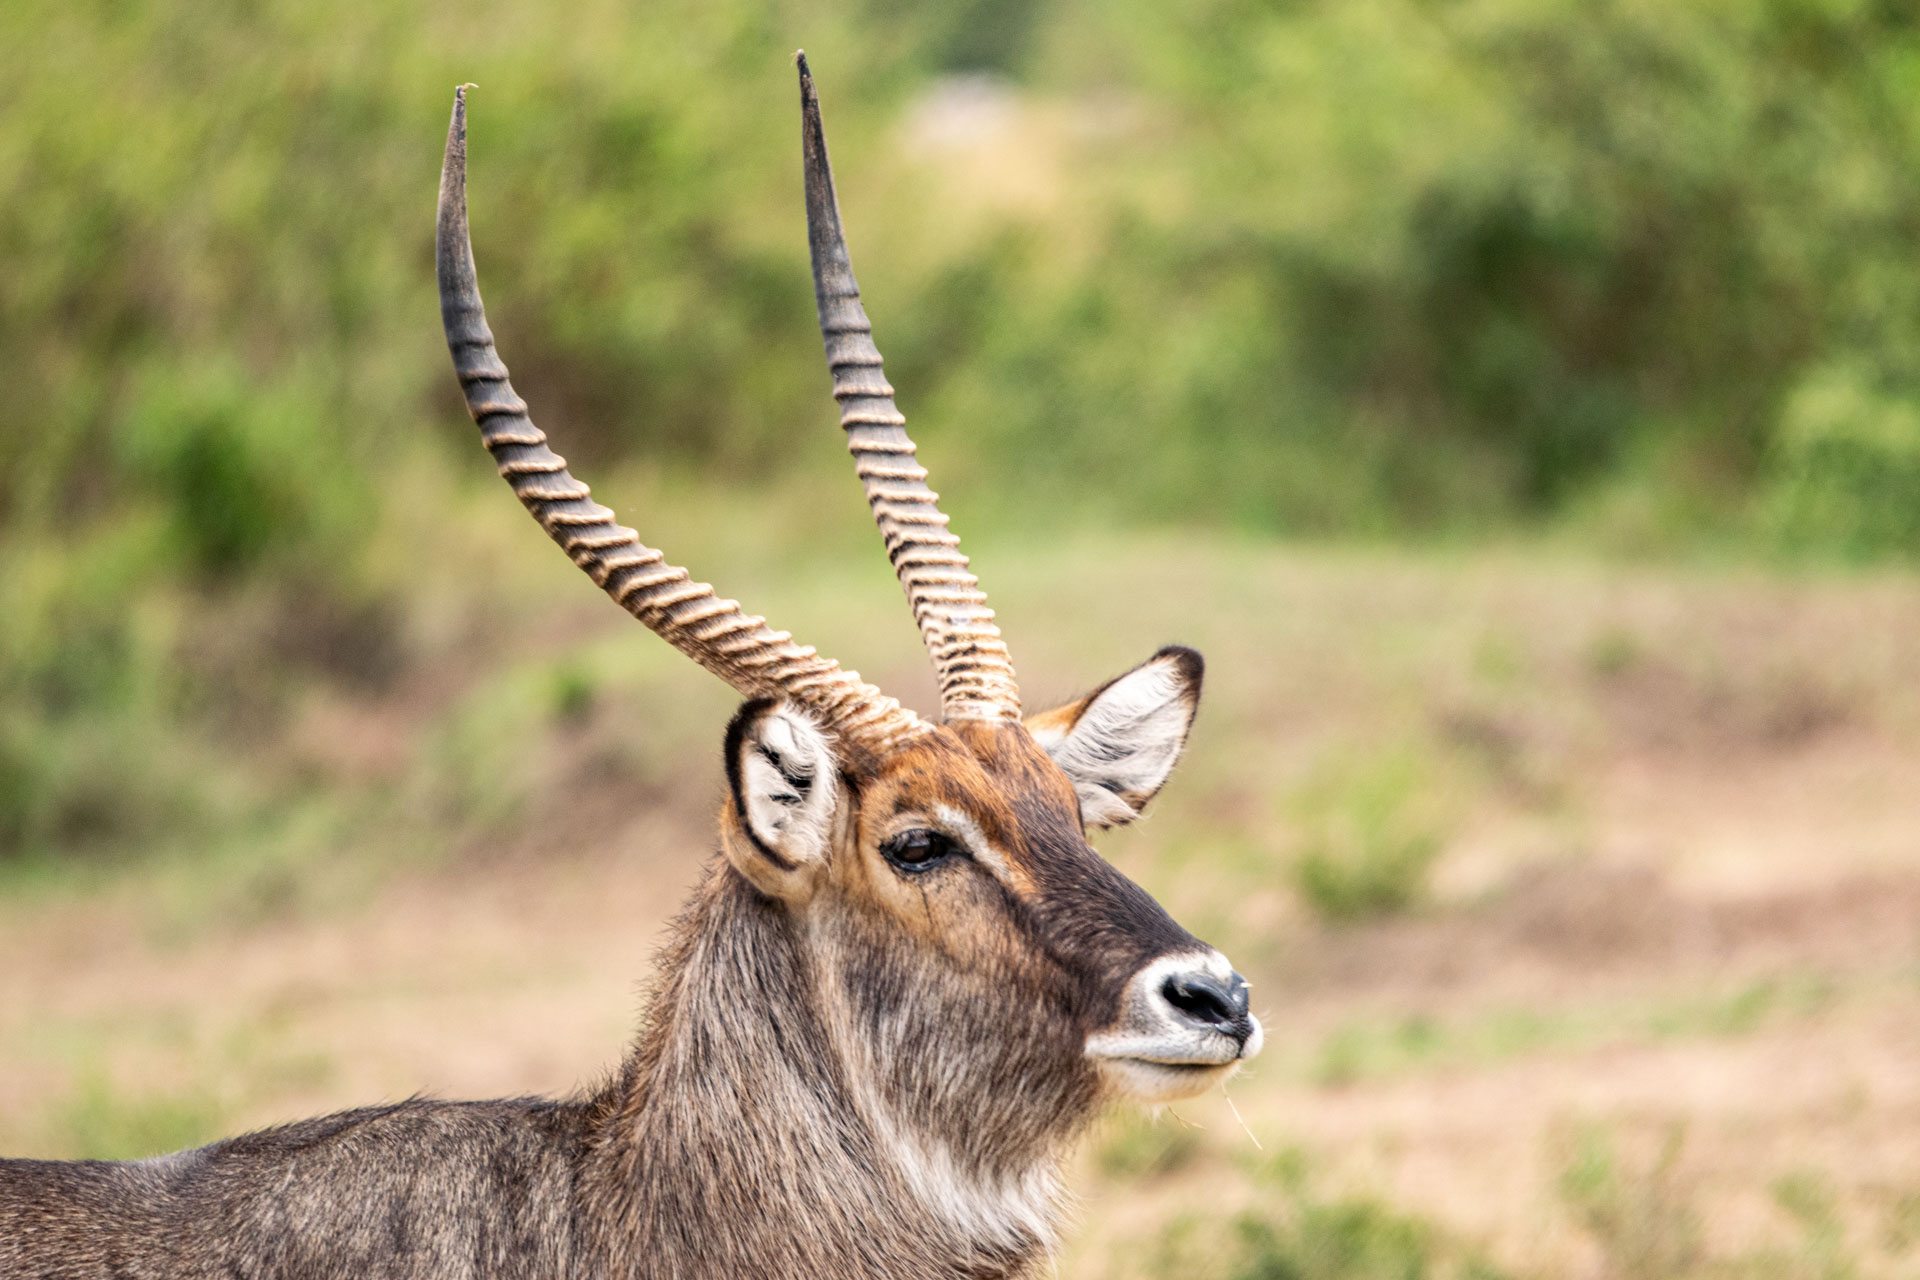 A stately waterbuck shows off its horns